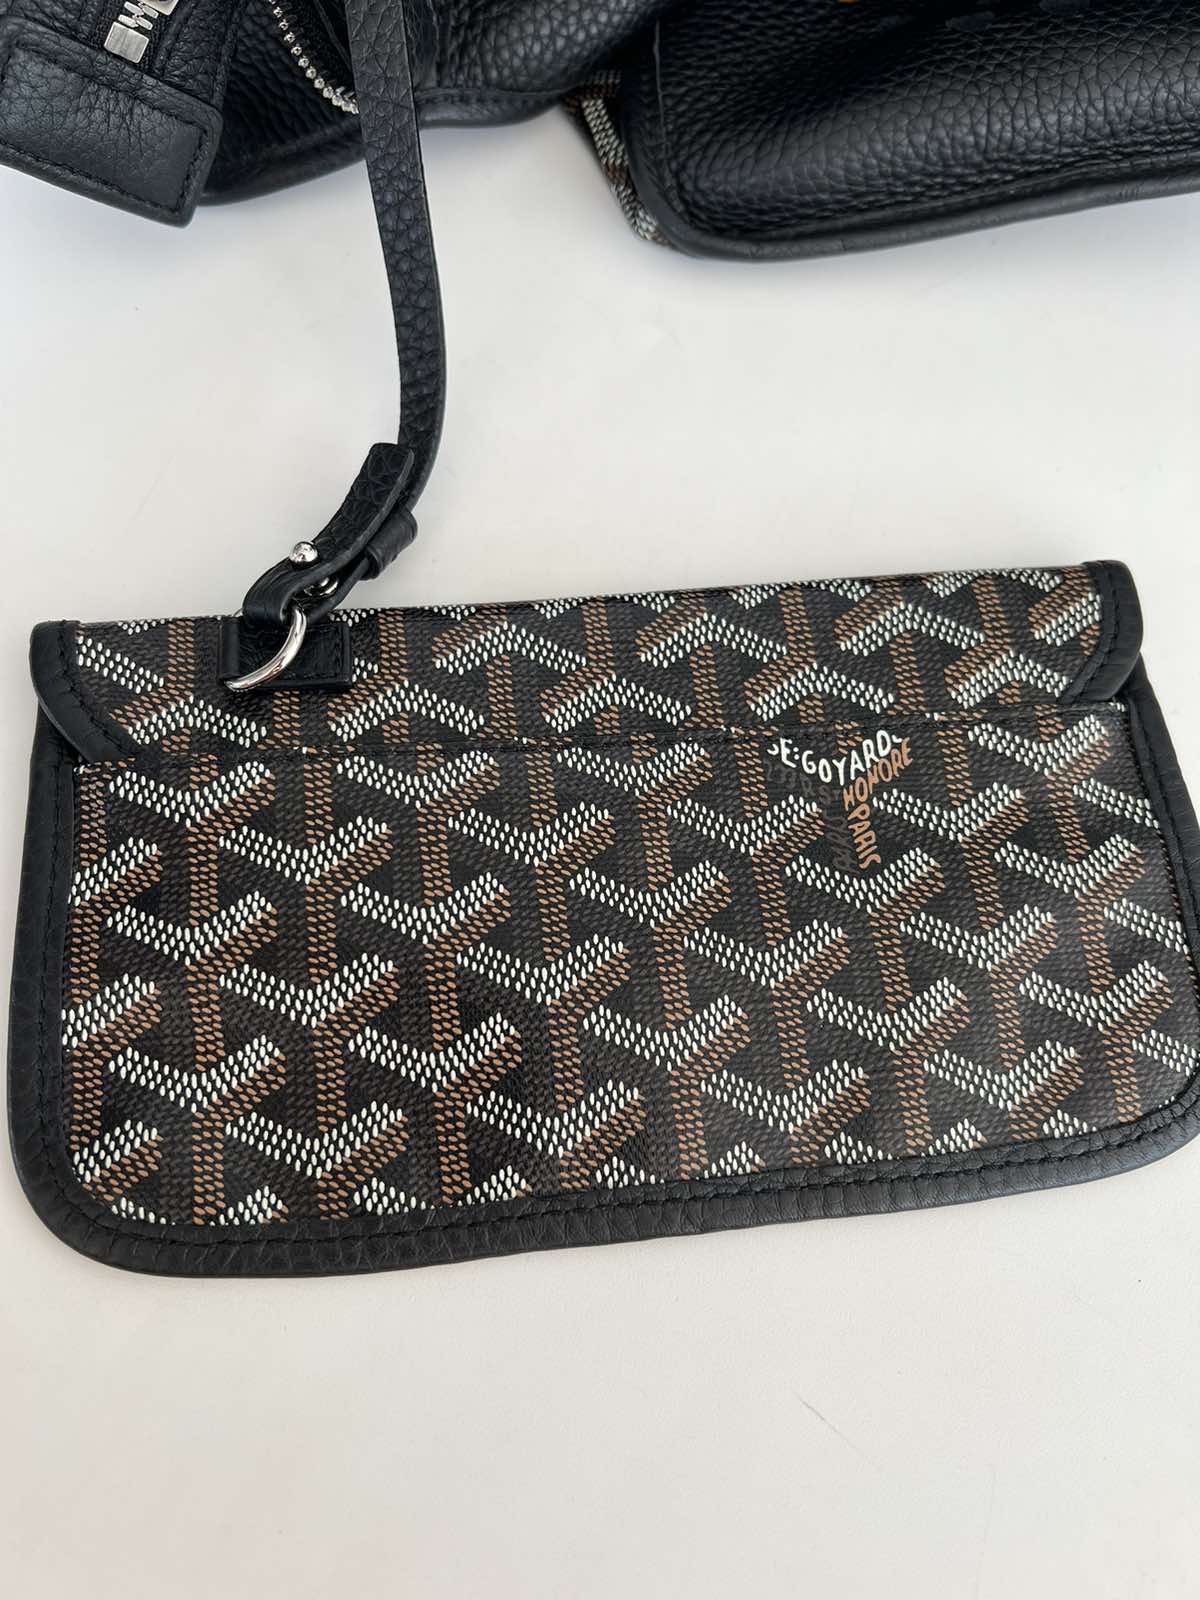 Goyard Black Sac Hardy. Made in France. With pouch ❤️